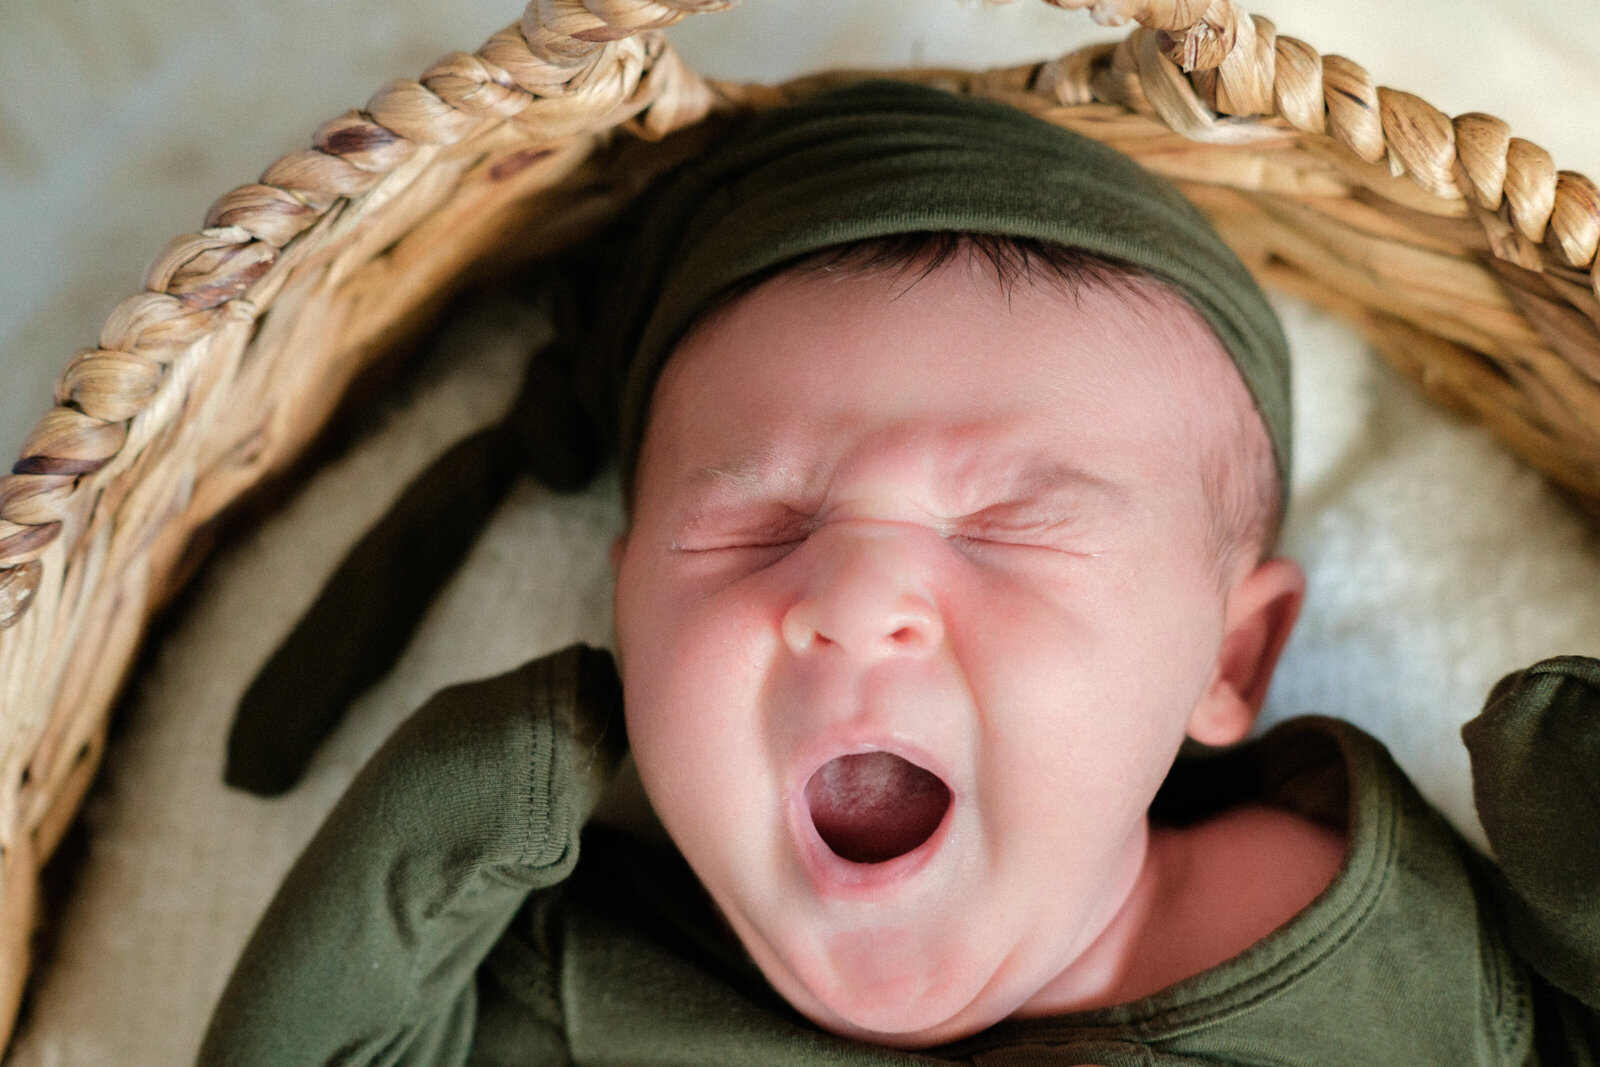 A baby boy yawns while laying in a basked and wearing a matching green hat and onesie